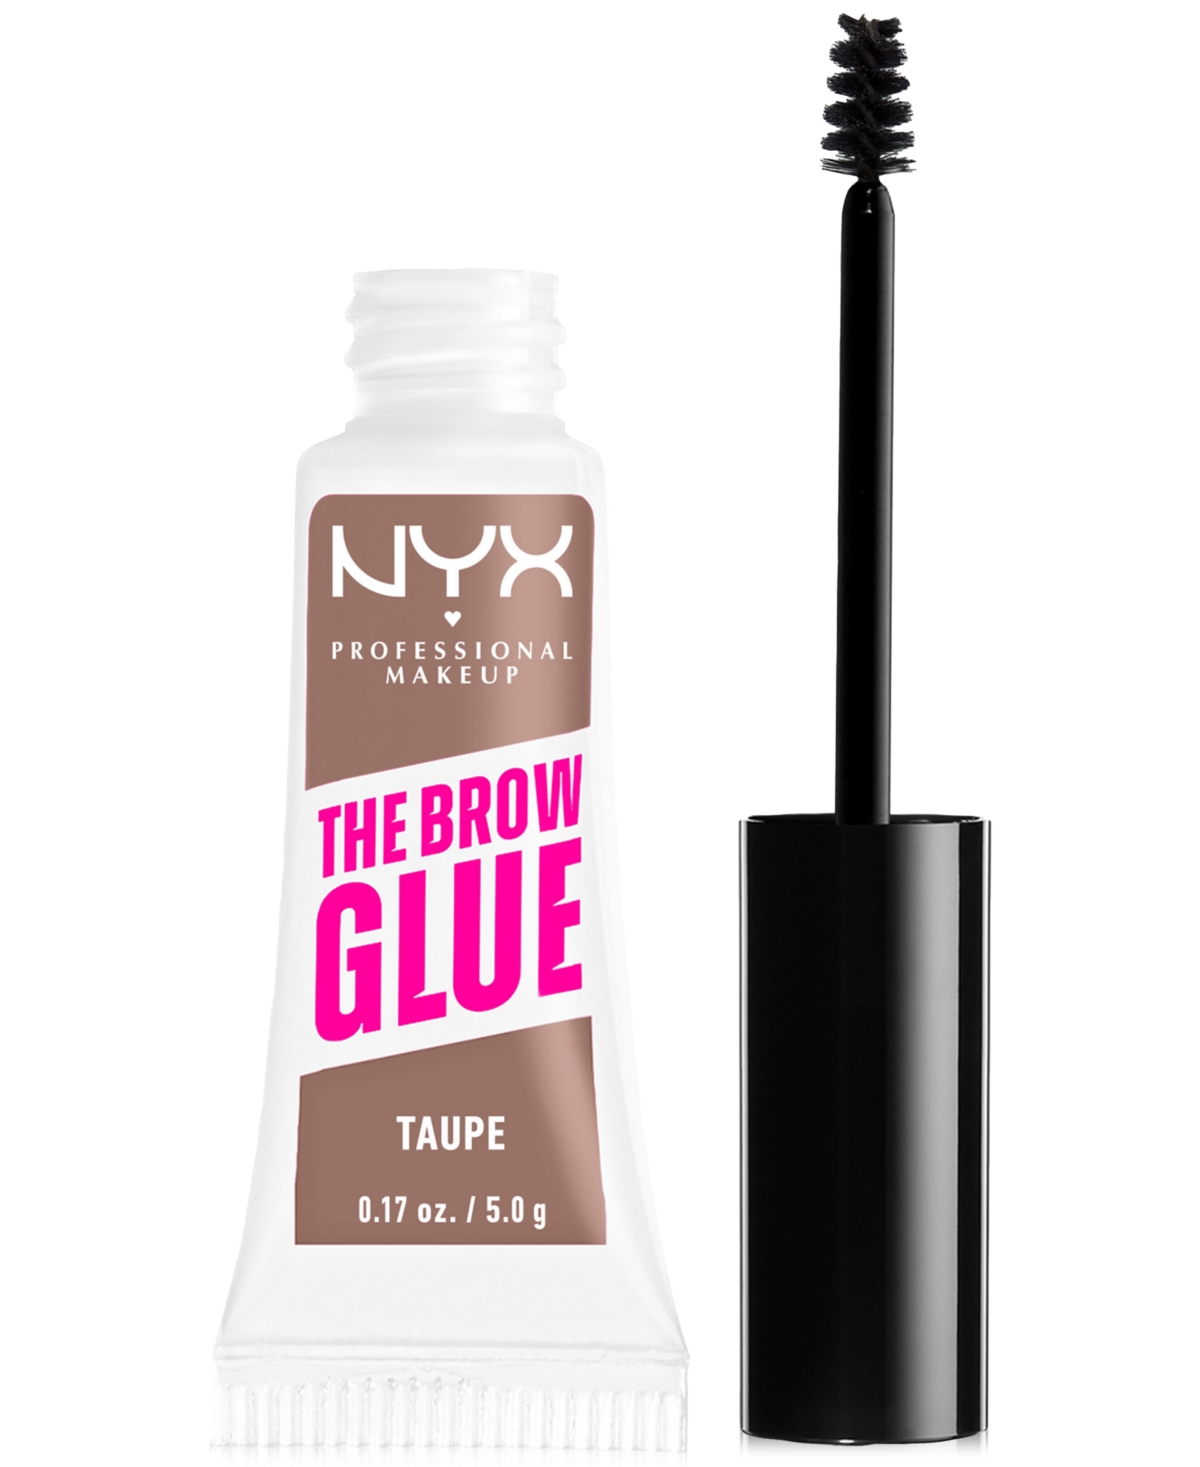 Nyx Professional Makeup The Brow Glue Laminating Gel In Taupe